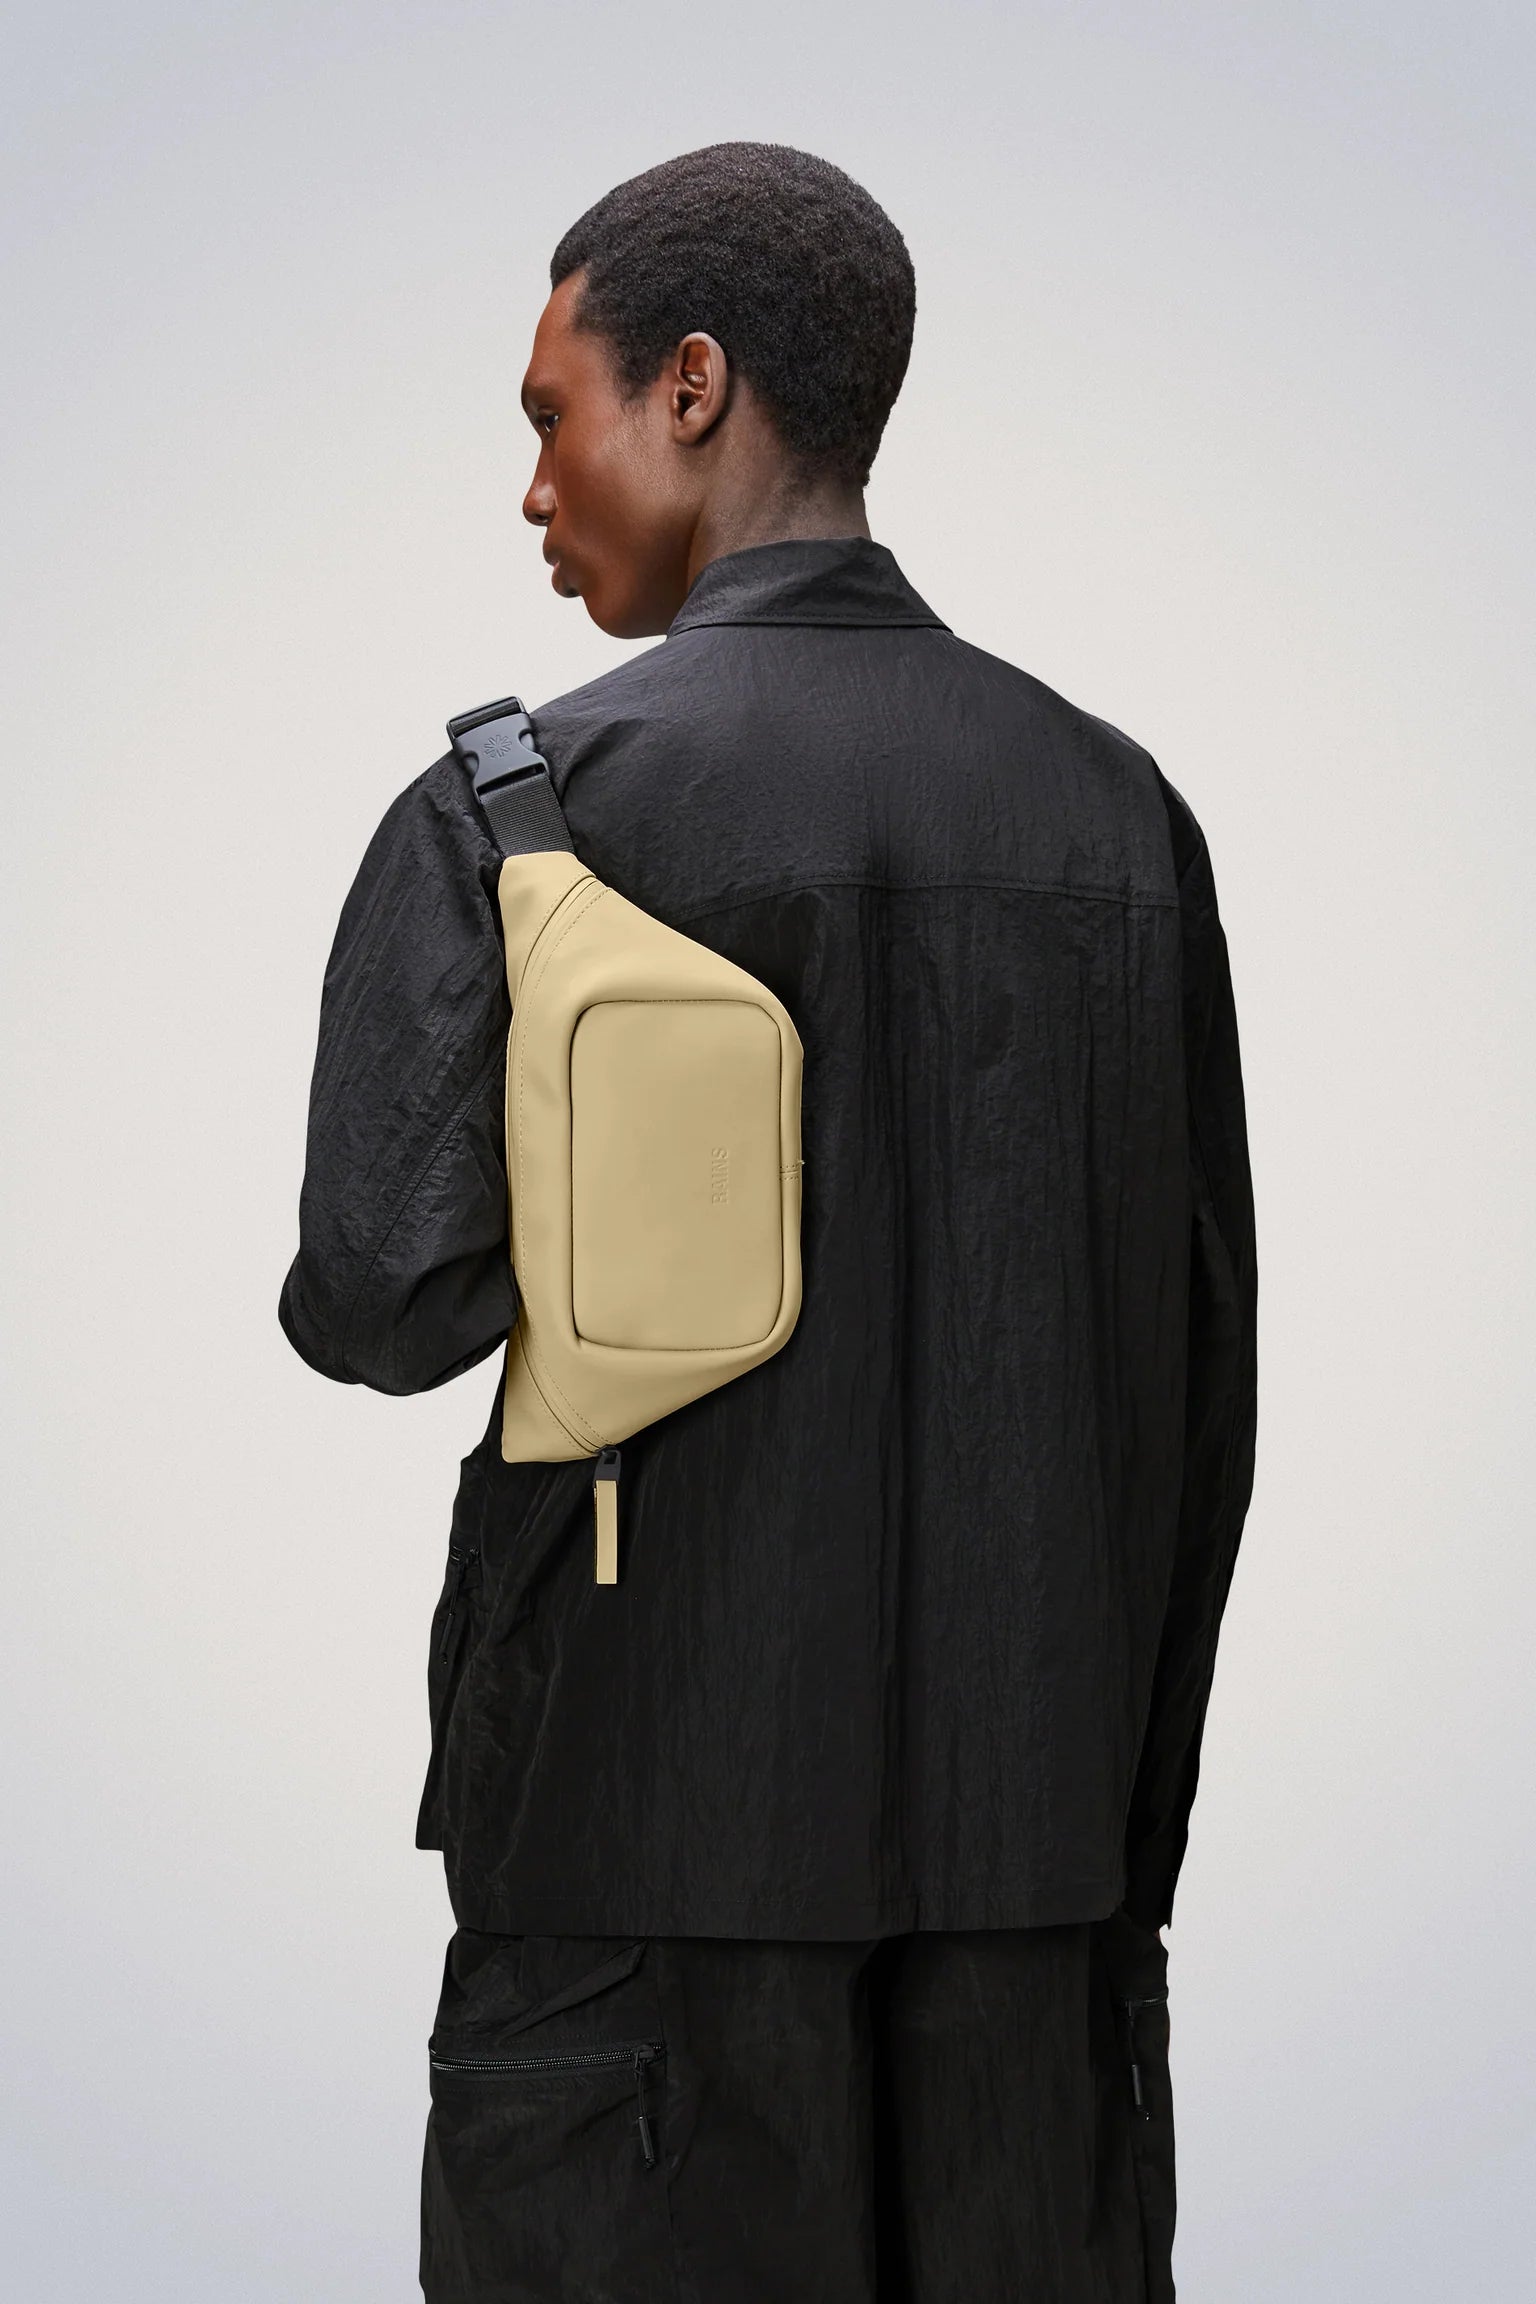 A man wearing a black jacket and black pants accessorized with a waterproof Rains Bum Bag Mini featuring an adjustable webbing strap.